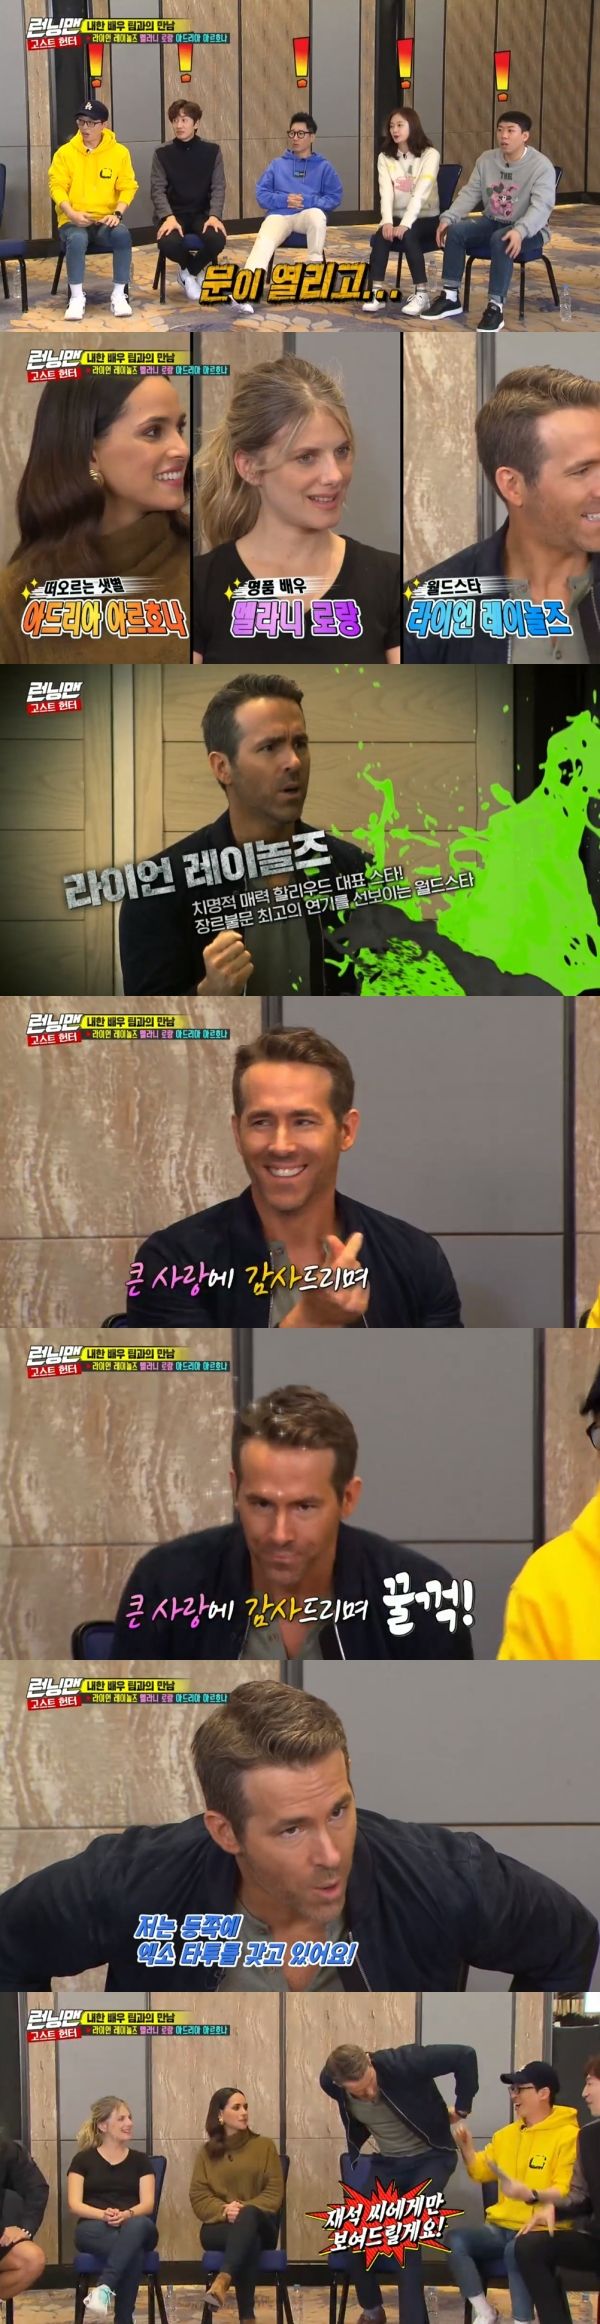 Lion Reynolds boasted an EXO tattoo (?)On SBS Running Man broadcast on the 22nd, Lion Reynolds, Melanie Laurent and Adria Arhona appeared with the welcome of the members.On the same day, Lion Reynolds embraced the members at the same time as he appeared. Lee Kwang-soo expressed his gratitude for saying, Its a giraffe.Ji Seok-jin smiled at Lion Reynolds, saying, He hugged me vigorously.Im glad to be out, Im looking forward to being the first victim here, Lion Reynolds said in a statement.Im happy to be here and thank you for inviting me, Adria Arhona said, adding that Melanie Laurent was prepared to be right.Lion Reynolds is a blockbuster-class action movie about the film 6 Underground, and it will be released online through streaming.Six agents pretend to die and defeat the villains. Lion Reynolds then showed a witty finger heart and laughed at the members. There is an EXO tattoo on the back.I will show it to Jae Seok only. Yoo Jae-seok laughed, saying, The world star showed me his inner life. 